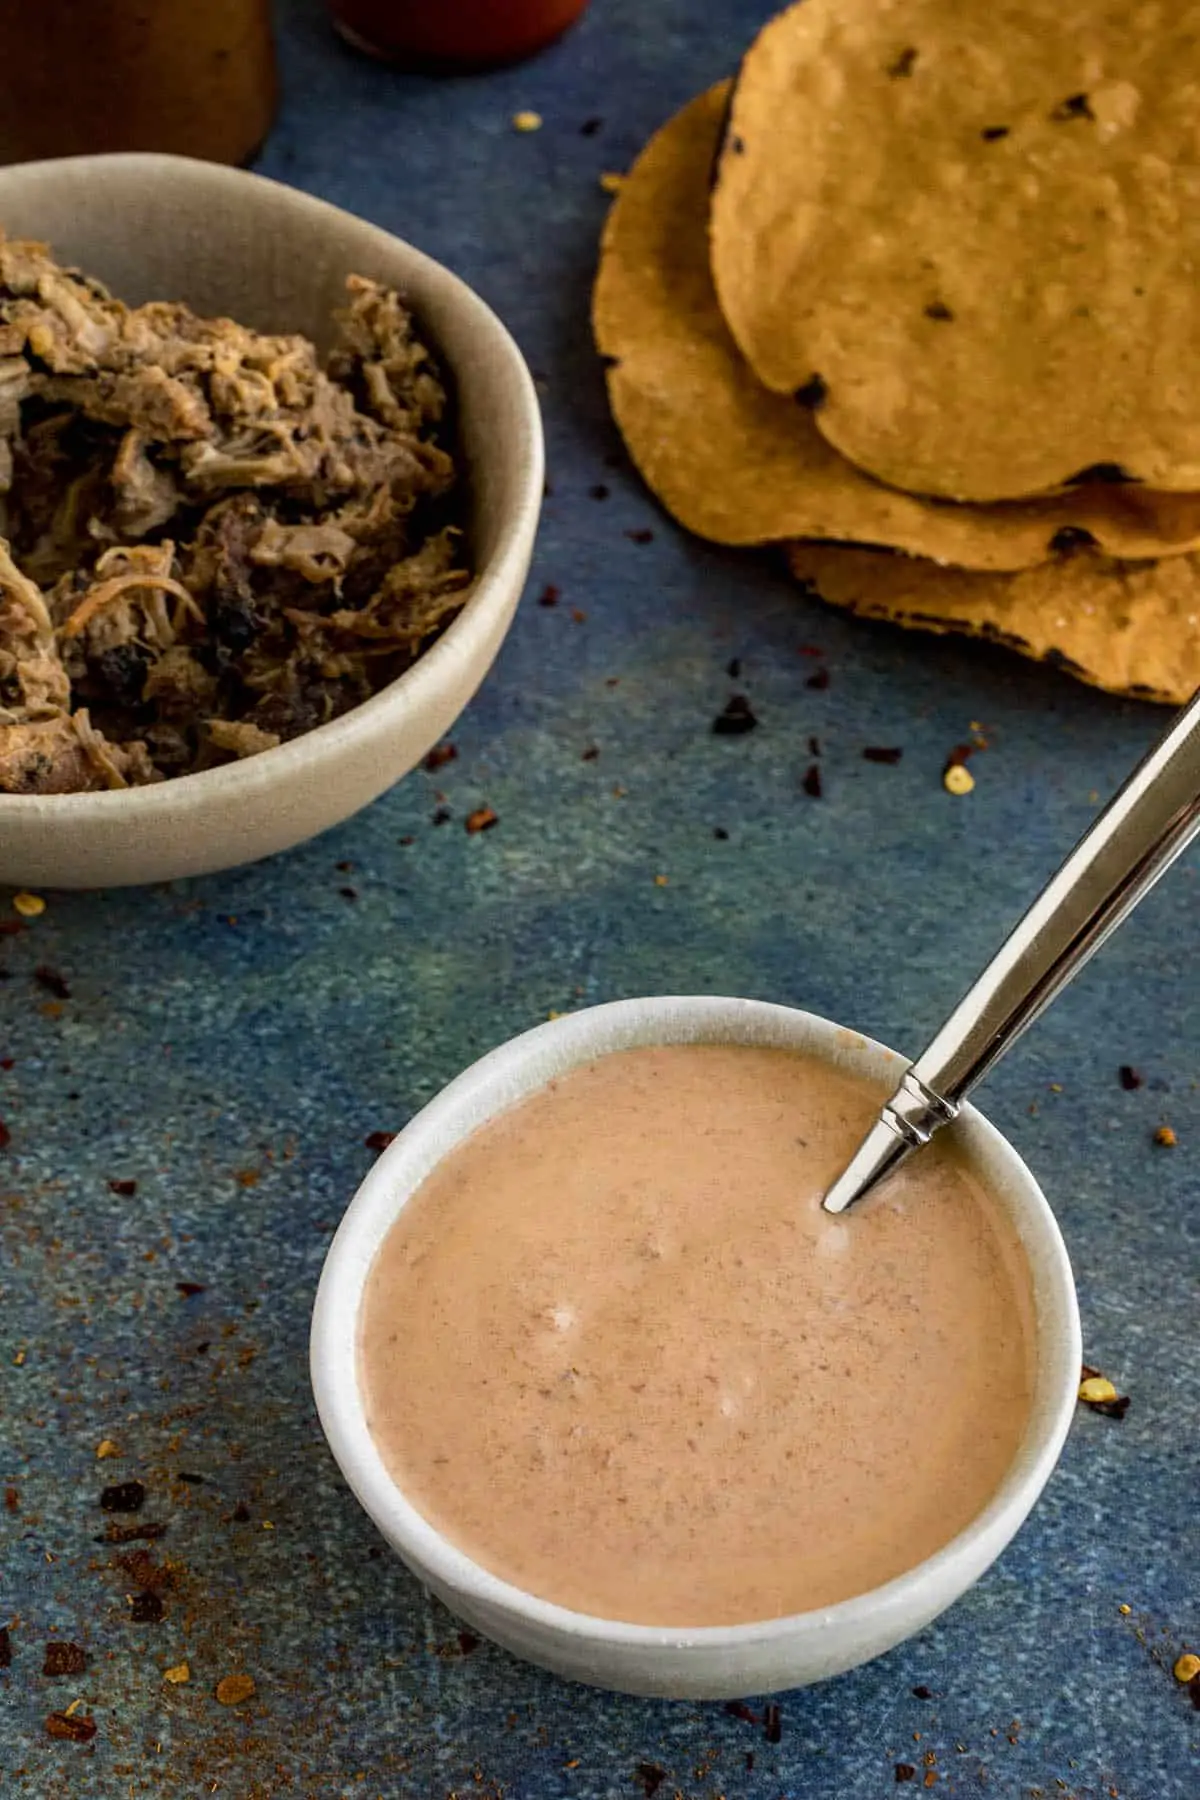 Chipotle Mayo in a bowl, served with pulled pork and tortillas.